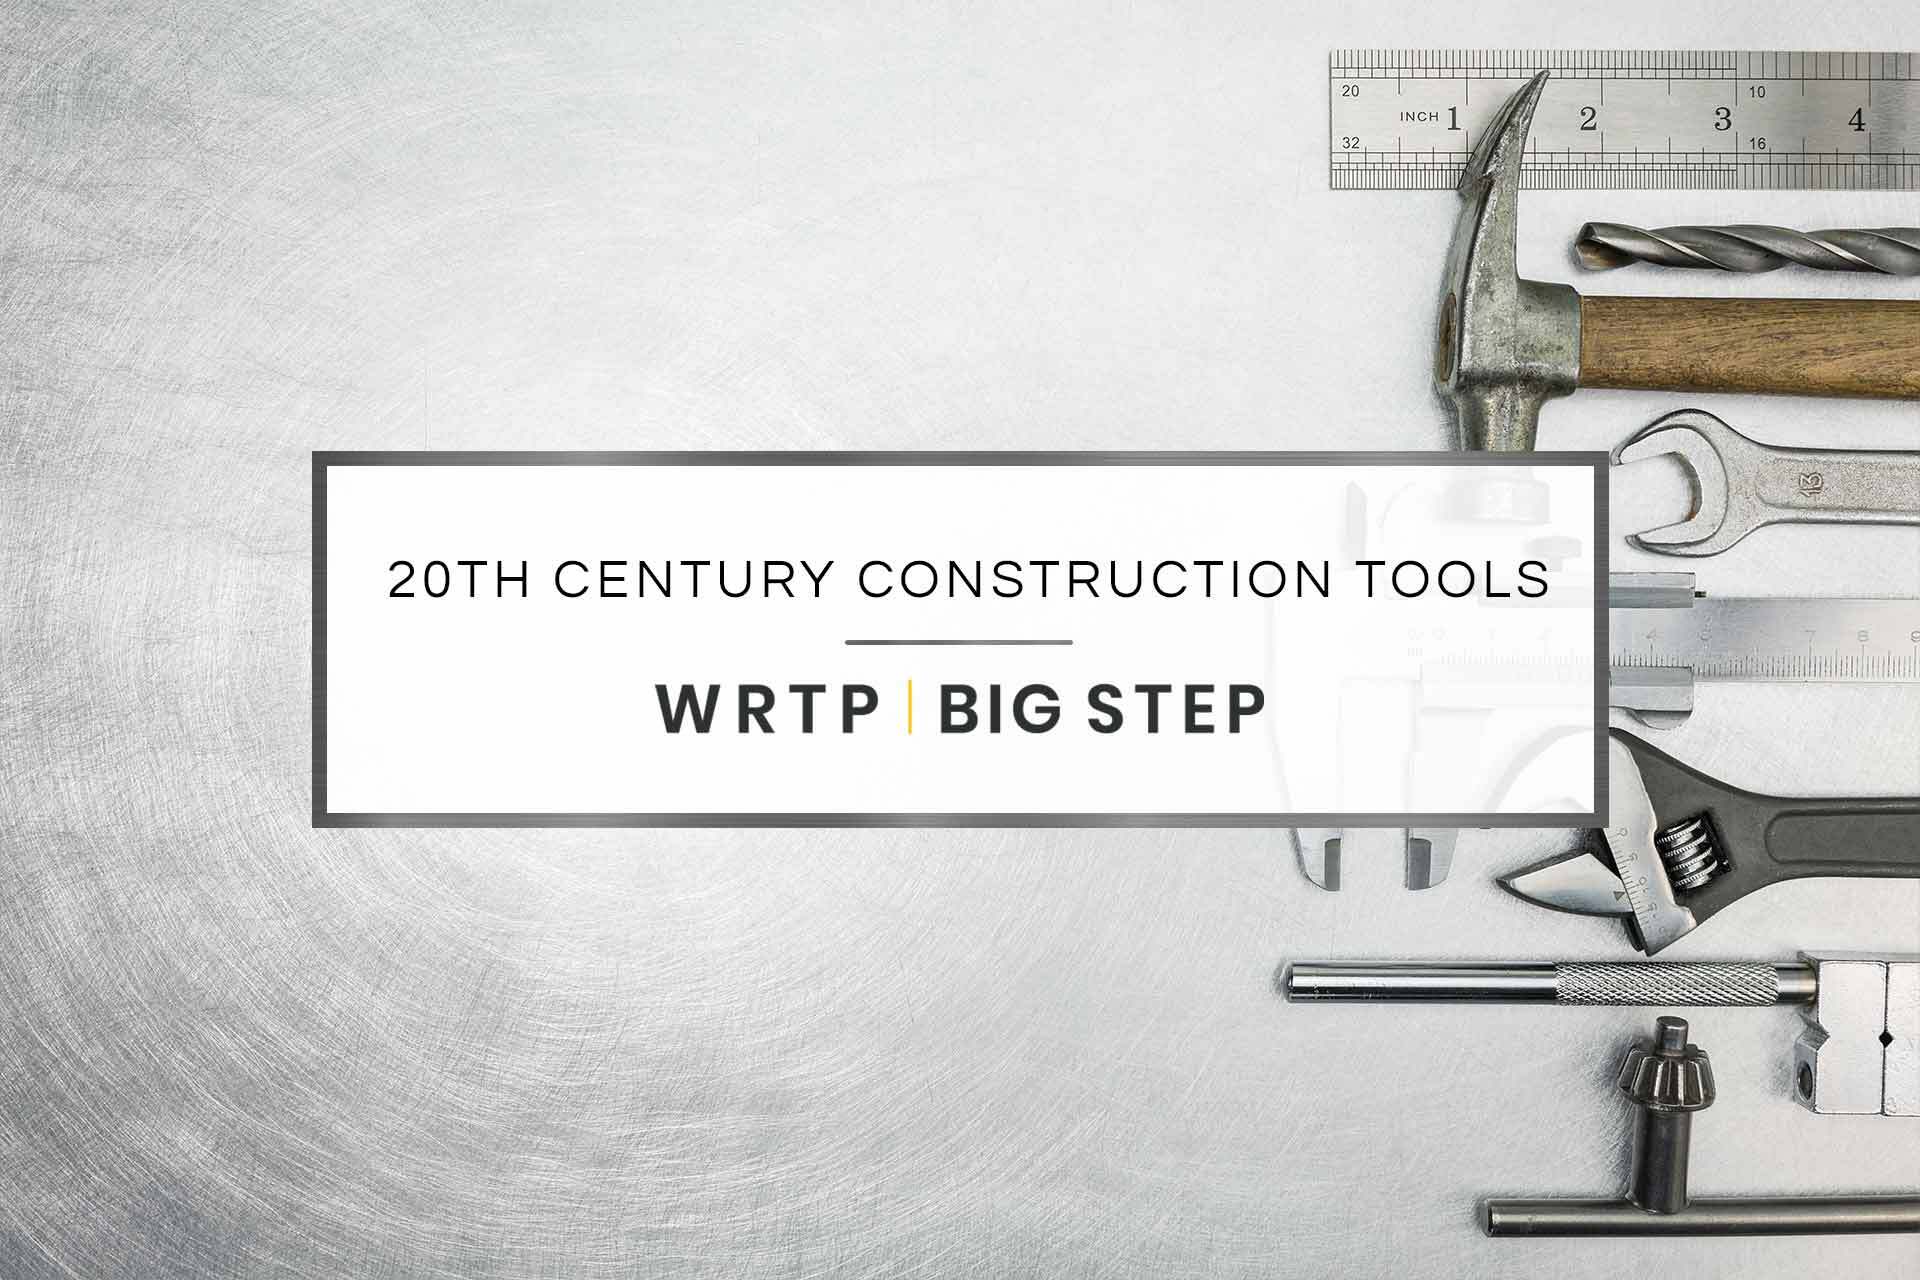 A History of 20th Century Construction Tools